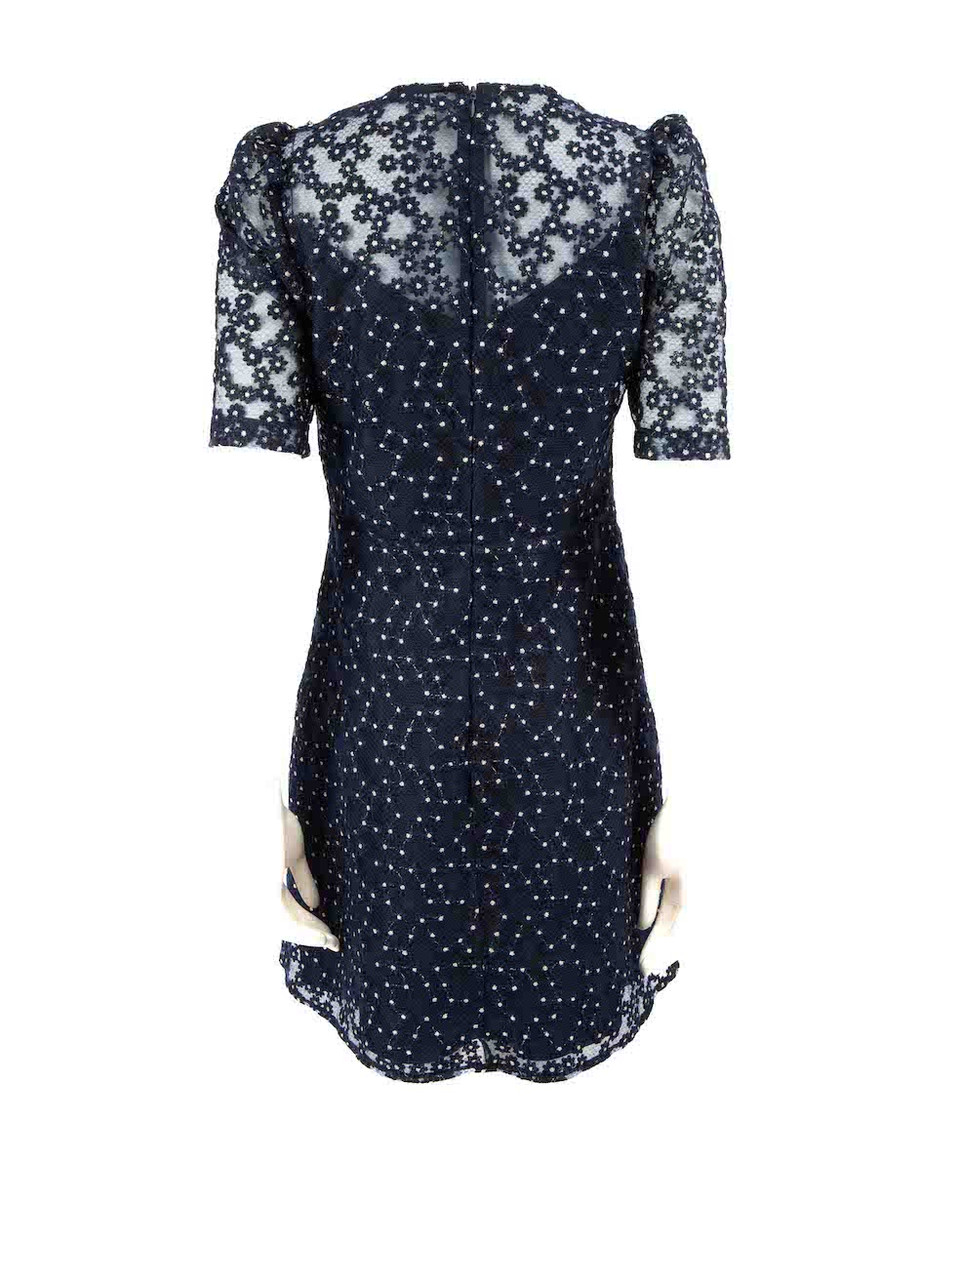 Sandro Navy Floral Lace Crystal Collar Dress